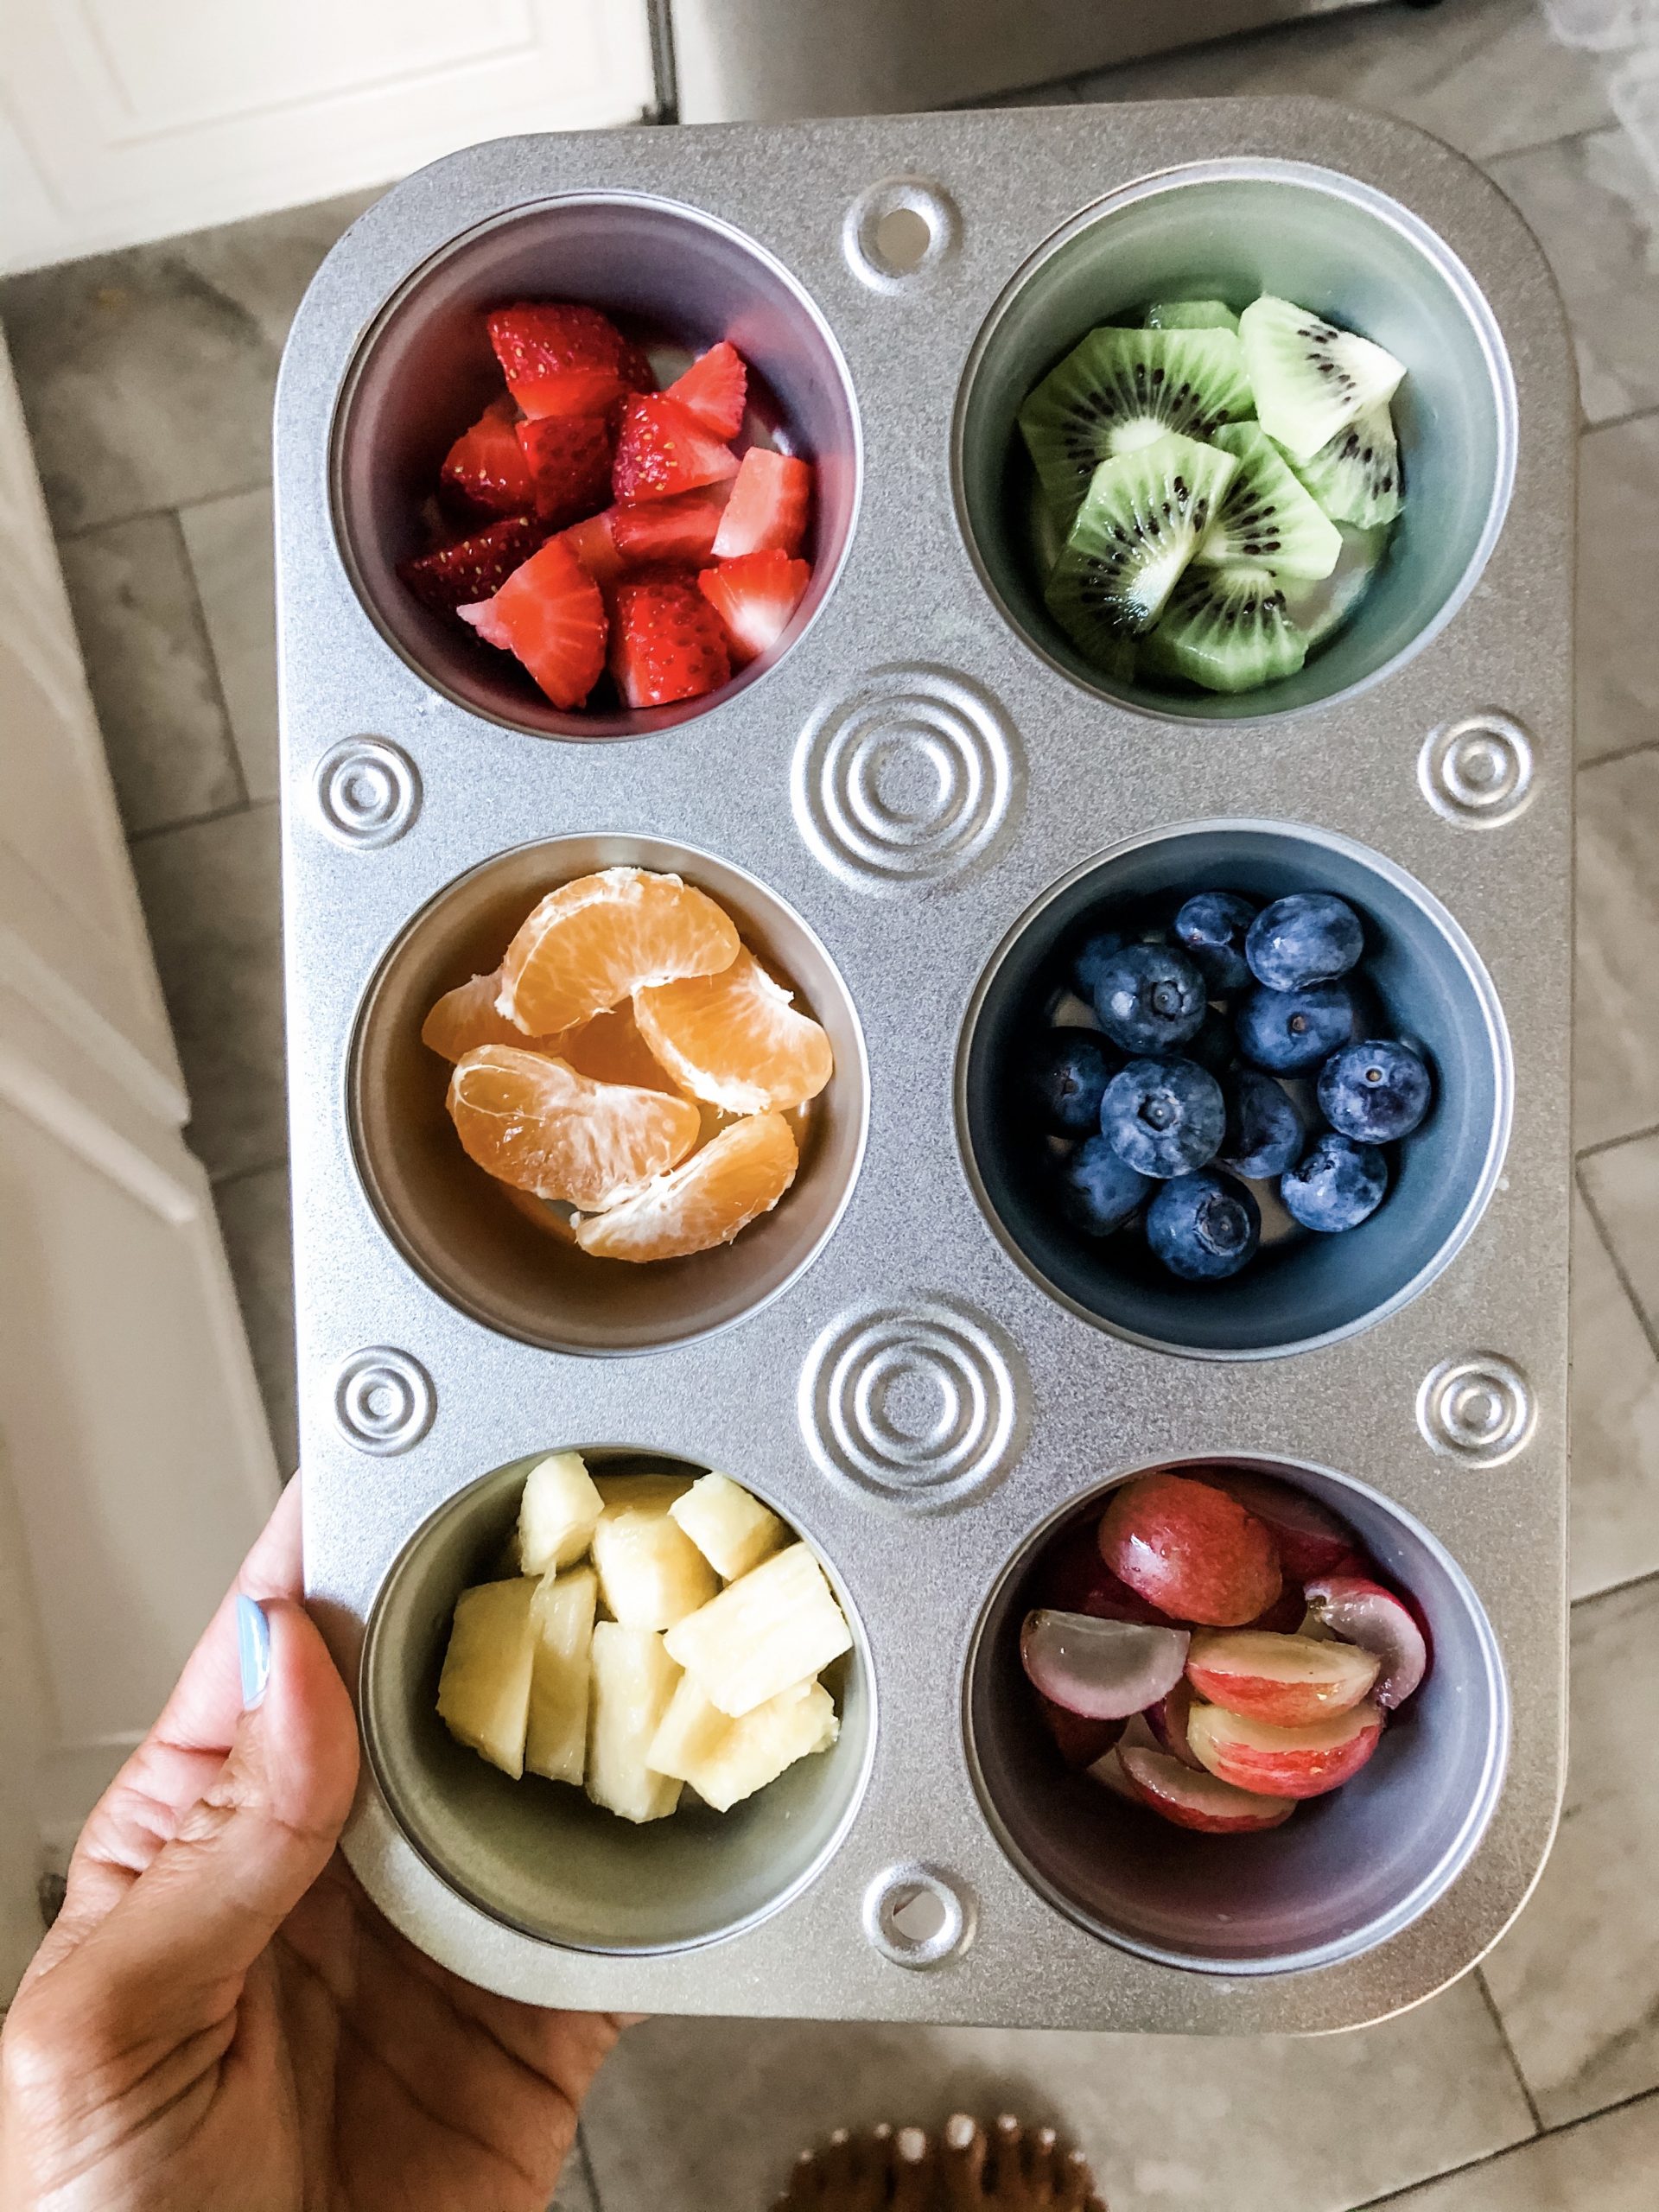 ad Using muffin tins as snack trays is one of my all-time favorite